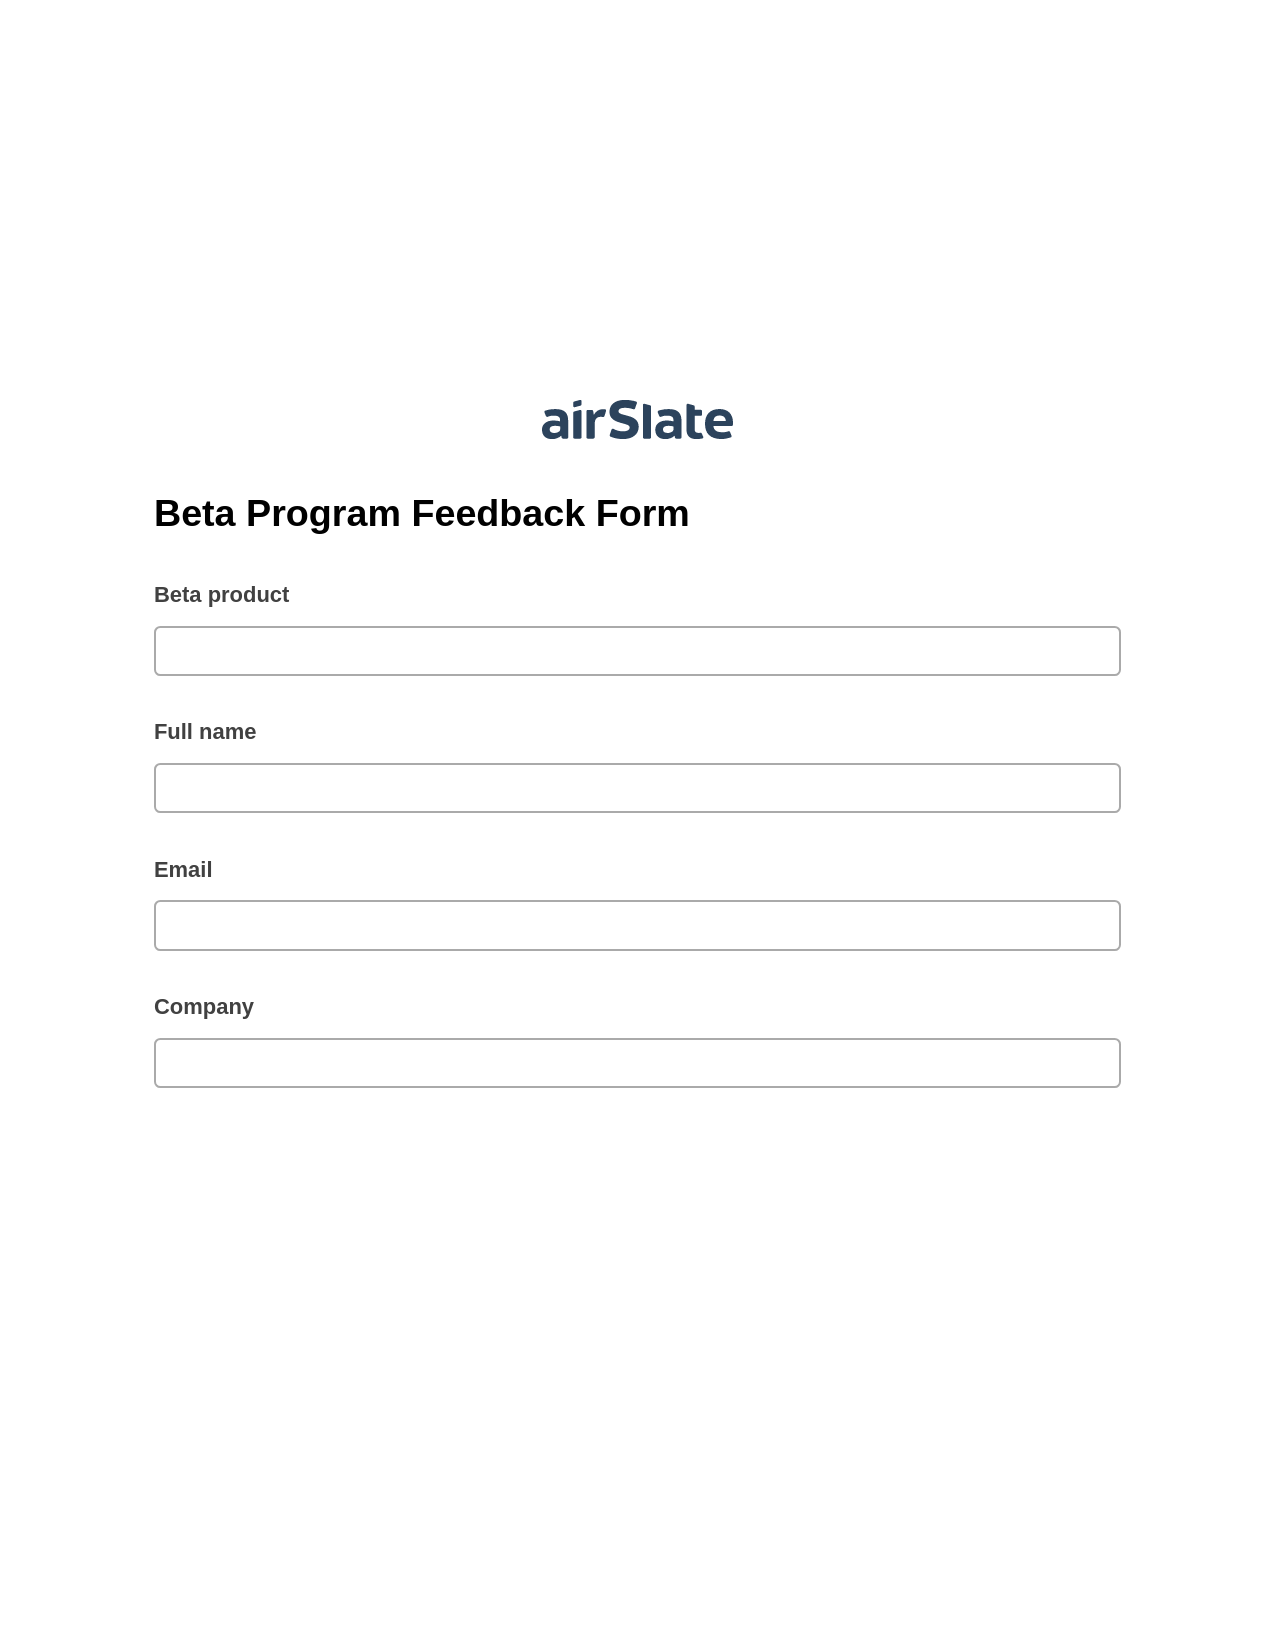 Beta Program Feedback Form Pre-fill Dropdowns from CSV File Bot, Update Salesforce Record Bot, Export to Google Sheet Bot